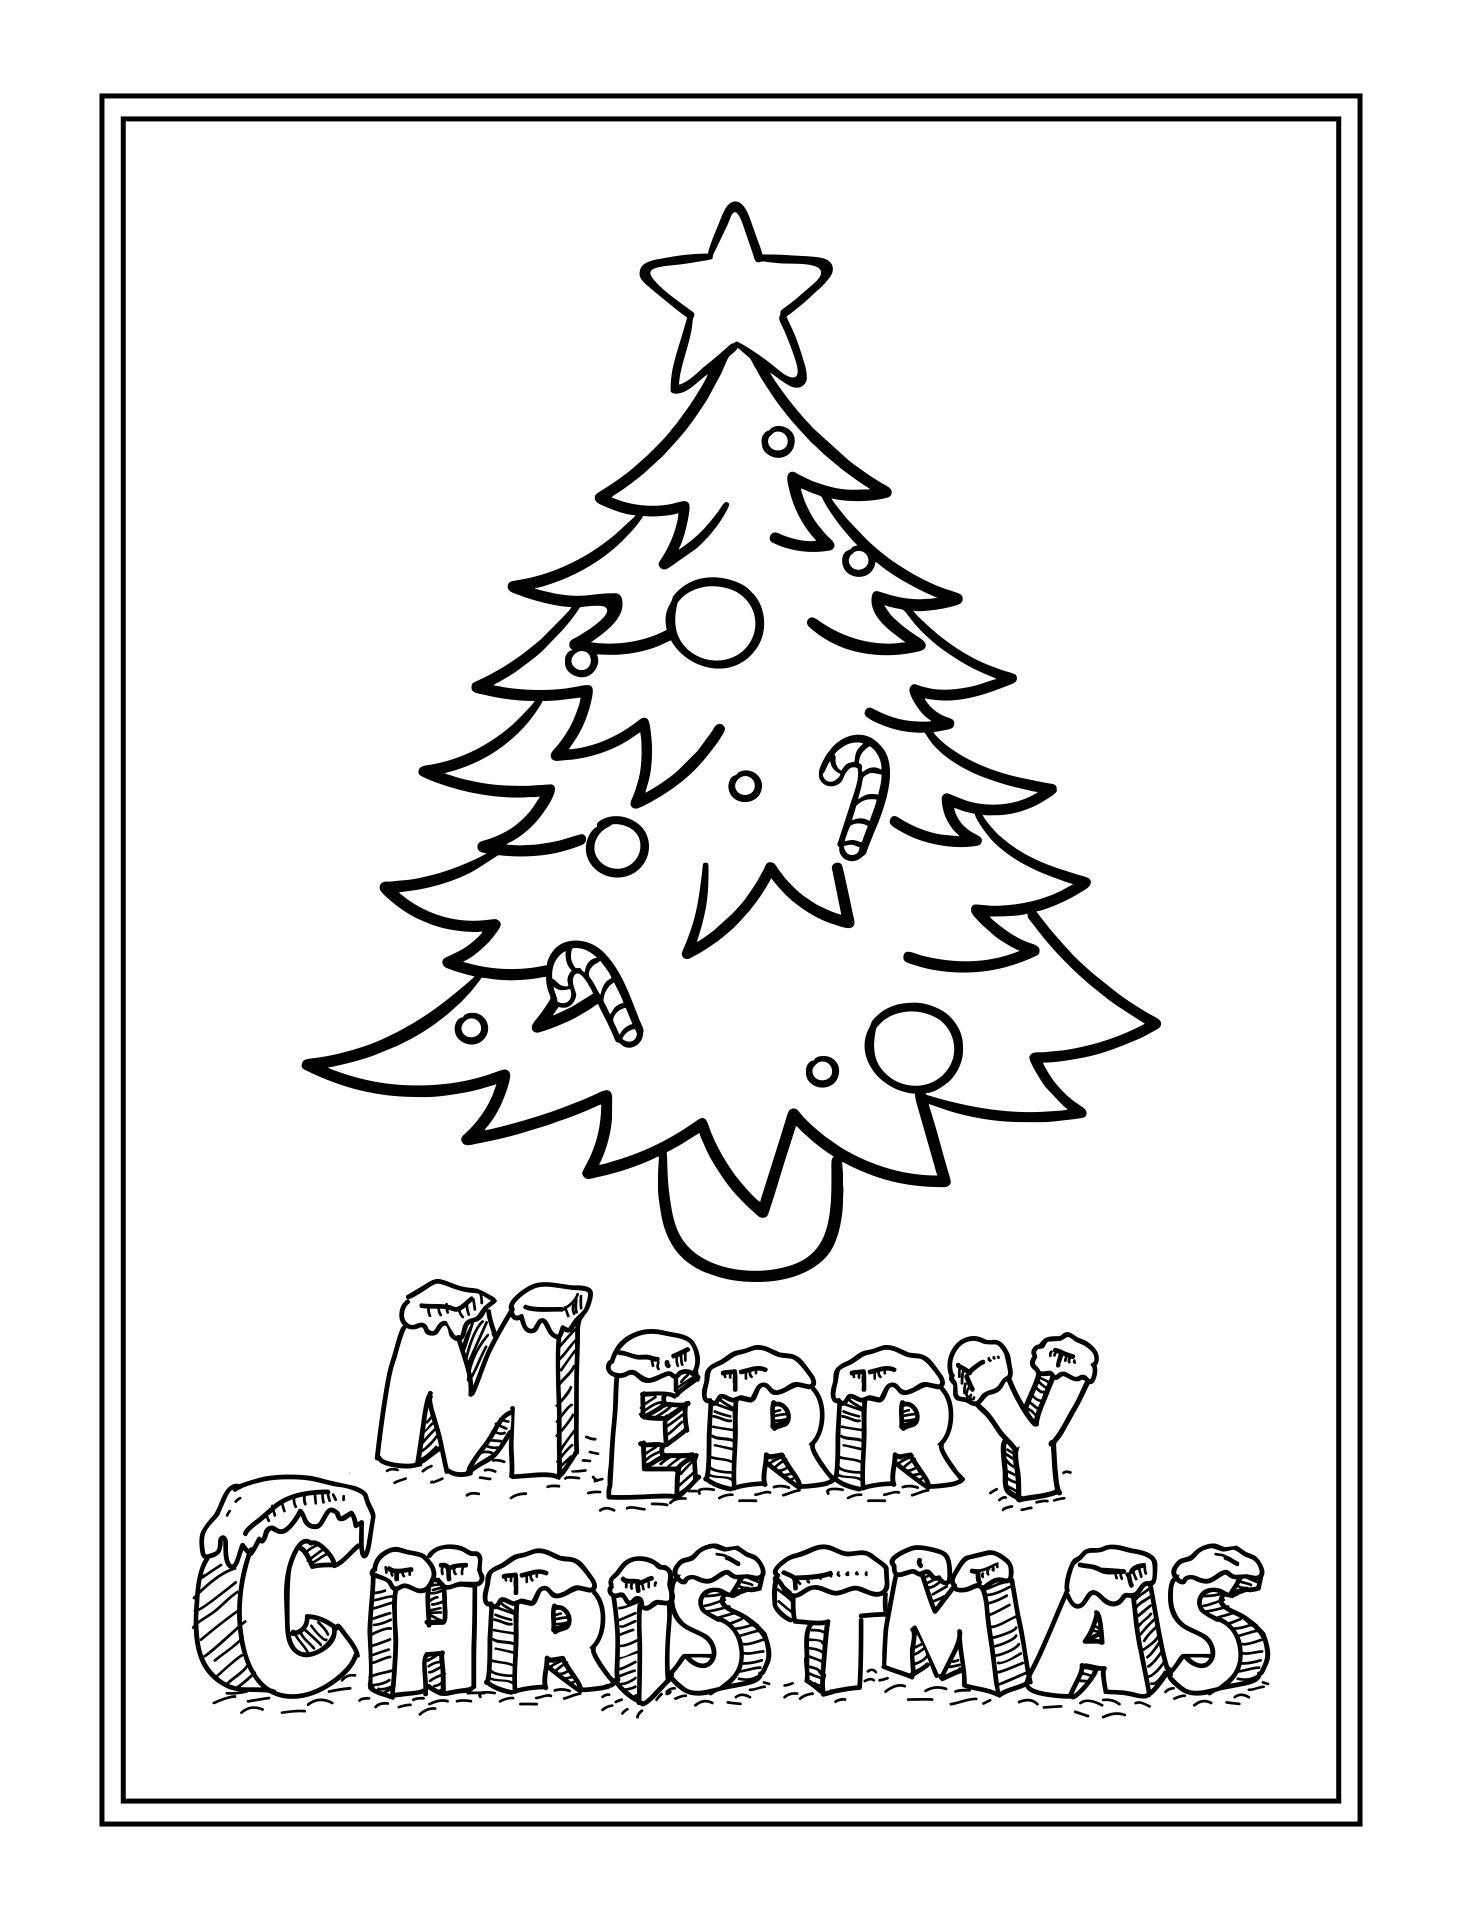 Printable Christmas Tree Card To Color In Page For Kids